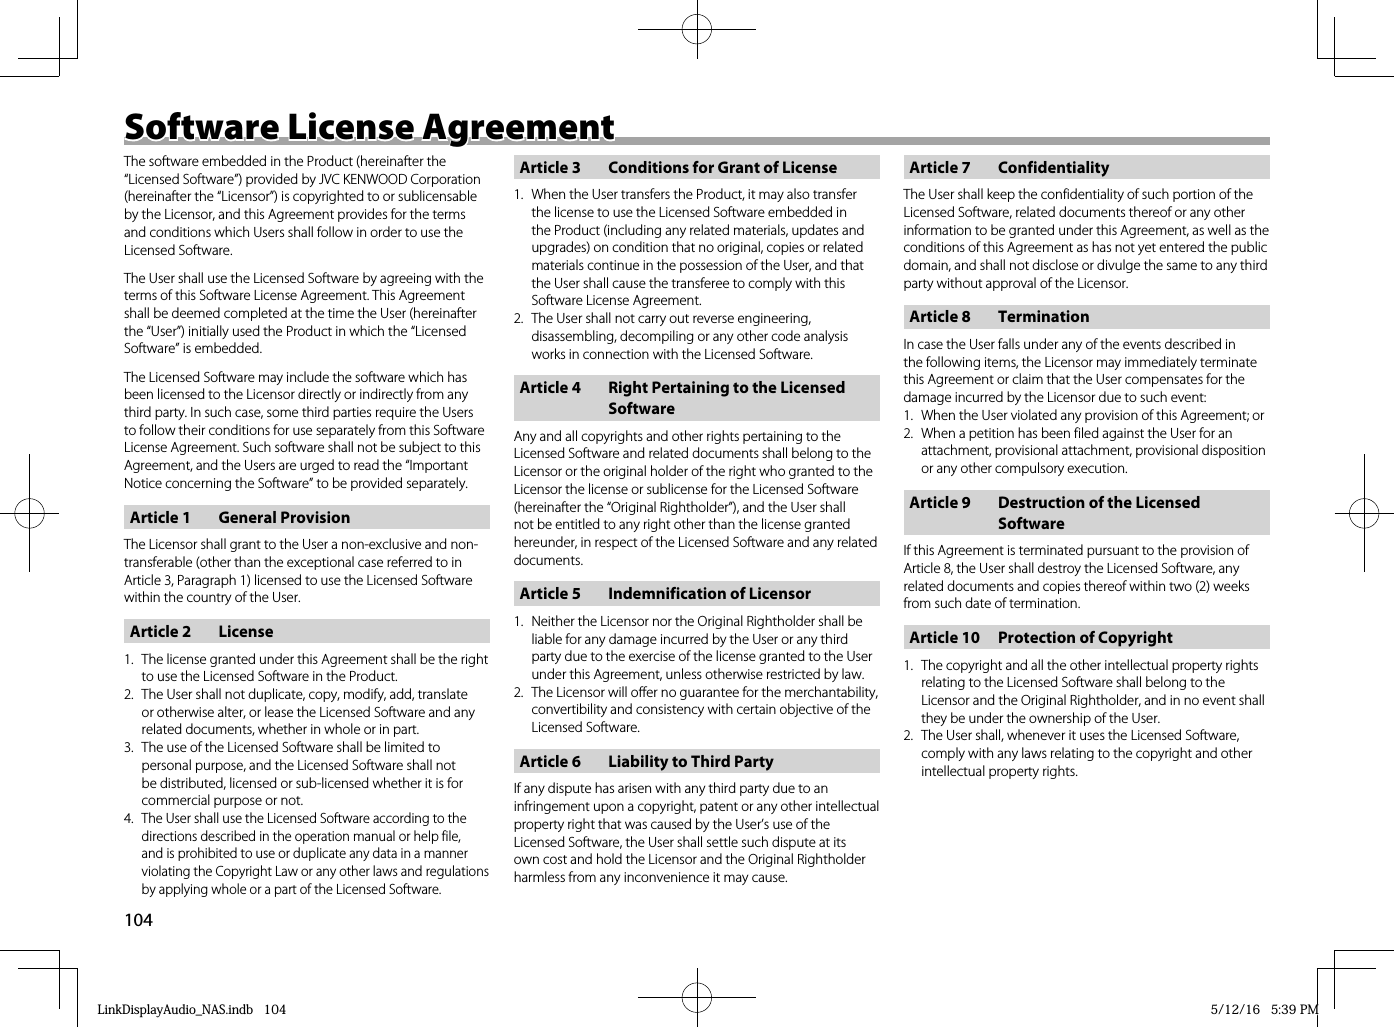 104Software License AgreementSoftware License AgreementThe software embedded in the Product (hereinafter the “Licensed Software”) provided by JVC KENWOOD Corporation (hereinafter the “Licensor”) is copyrighted to or sublicensable by the Licensor, and this Agreement provides for the terms and conditions which Users shall follow in order to use the Licensed Software.The User shall use the Licensed Software by agreeing with the terms of this Software License Agreement. This Agreement shall be deemed completed at the time the User (hereinafter the “User”) initially used the Product in which the “Licensed Software” is embedded.The Licensed Software may include the software which has been licensed to the Licensor directly or indirectly from any third party. In such case, some third parties require the Users to follow their conditions for use separately from this Software License Agreement. Such software shall not be subject to this Agreement, and the Users are urged to read the “Important Notice concerning the Software” to be provided separately.Article 1  General ProvisionThe Licensor shall grant to the User a non-exclusive and non-transferable (other than the exceptional case referred to in Article 3, Paragraph 1) licensed to use the Licensed Software within the country of the User.Article 2  License1.  The license granted under this Agreement shall be the right to use the Licensed Software in the Product. 2.  The User shall not duplicate, copy, modify, add, translate or otherwise alter, or lease the Licensed Software and any related documents, whether in whole or in part.3.  The use of the Licensed Software shall be limited to personal purpose, and the Licensed Software shall not be distributed, licensed or sub-licensed whether it is for commercial purpose or not.4. The User shall use the Licensed Software according to the directions described in the operation manual or help file, and is prohibited to use or duplicate any data in a manner violating the Copyright Law or any other laws and regulations by applying whole or a part of the Licensed Software.Article 3  Conditions for Grant of License1.  When the User transfers the Product, it may also transfer the license to use the Licensed Software embedded in the Product (including any related materials, updates and upgrades) on condition that no original, copies or related materials continue in the possession of the User, and that the User shall cause the transferee to comply with this Software License Agreement. 2.  The User shall not carry out reverse engineering, disassembling, decompiling or any other code analysis works in connection with the Licensed Software. Article 4  Right Pertaining to the Licensed SoftwareAny and all copyrights and other rights pertaining to the Licensed Software and related documents shall belong to the Licensor or the original holder of the right who granted to the Licensor the license or sublicense for the Licensed Software (hereinafter the “Original Rightholder”), and the User shall not be entitled to any right other than the license granted hereunder, in respect of the Licensed Software and any related documents. Article 5  Indemnification of Licensor1.  Neither the Licensor nor the Original Rightholder shall be liable for any damage incurred by the User or any third party due to the exercise of the license granted to the User under this Agreement, unless otherwise restricted by law. 2.  The Licensor will offer no guarantee for the merchantability, convertibility and consistency with certain objective of the Licensed Software. Article 6  Liability to Third PartyIf any dispute has arisen with any third party due to an infringement upon a copyright, patent or any other intellectual property right that was caused by the User’s use of the Licensed Software, the User shall settle such dispute at its own cost and hold the Licensor and the Original Rightholder harmless from any inconvenience it may cause.Article 7  ConfidentialityThe User shall keep the confidentiality of such portion of the Licensed Software, related documents thereof or any other information to be granted under this Agreement, as well as the conditions of this Agreement as has not yet entered the public domain, and shall not disclose or divulge the same to any third party without approval of the Licensor. Article 8  TerminationIn case the User falls under any of the events described in the following items, the Licensor may immediately terminate this Agreement or claim that the User compensates for the damage incurred by the Licensor due to such event:1.  When the User violated any provision of this Agreement; or2.  When a petition has been filed against the User for an attachment, provisional attachment, provisional disposition or any other compulsory execution.Article 9  Destruction of the Licensed SoftwareIf this Agreement is terminated pursuant to the provision of Article 8, the User shall destroy the Licensed Software, any related documents and copies thereof within two (2) weeks from such date of termination.Article 10  Protection of Copyright1.  The copyright and all the other intellectual property rights relating to the Licensed Software shall belong to the Licensor and the Original Rightholder, and in no event shall they be under the ownership of the User. 2.  The User shall, whenever it uses the Licensed Software, comply with any laws relating to the copyright and other intellectual property rights.LinkDisplayAudio_NAS.indb   104LinkDisplayAudio_NAS.indb   104 5/12/16   5:39 PM5/12/16   5:39 PM